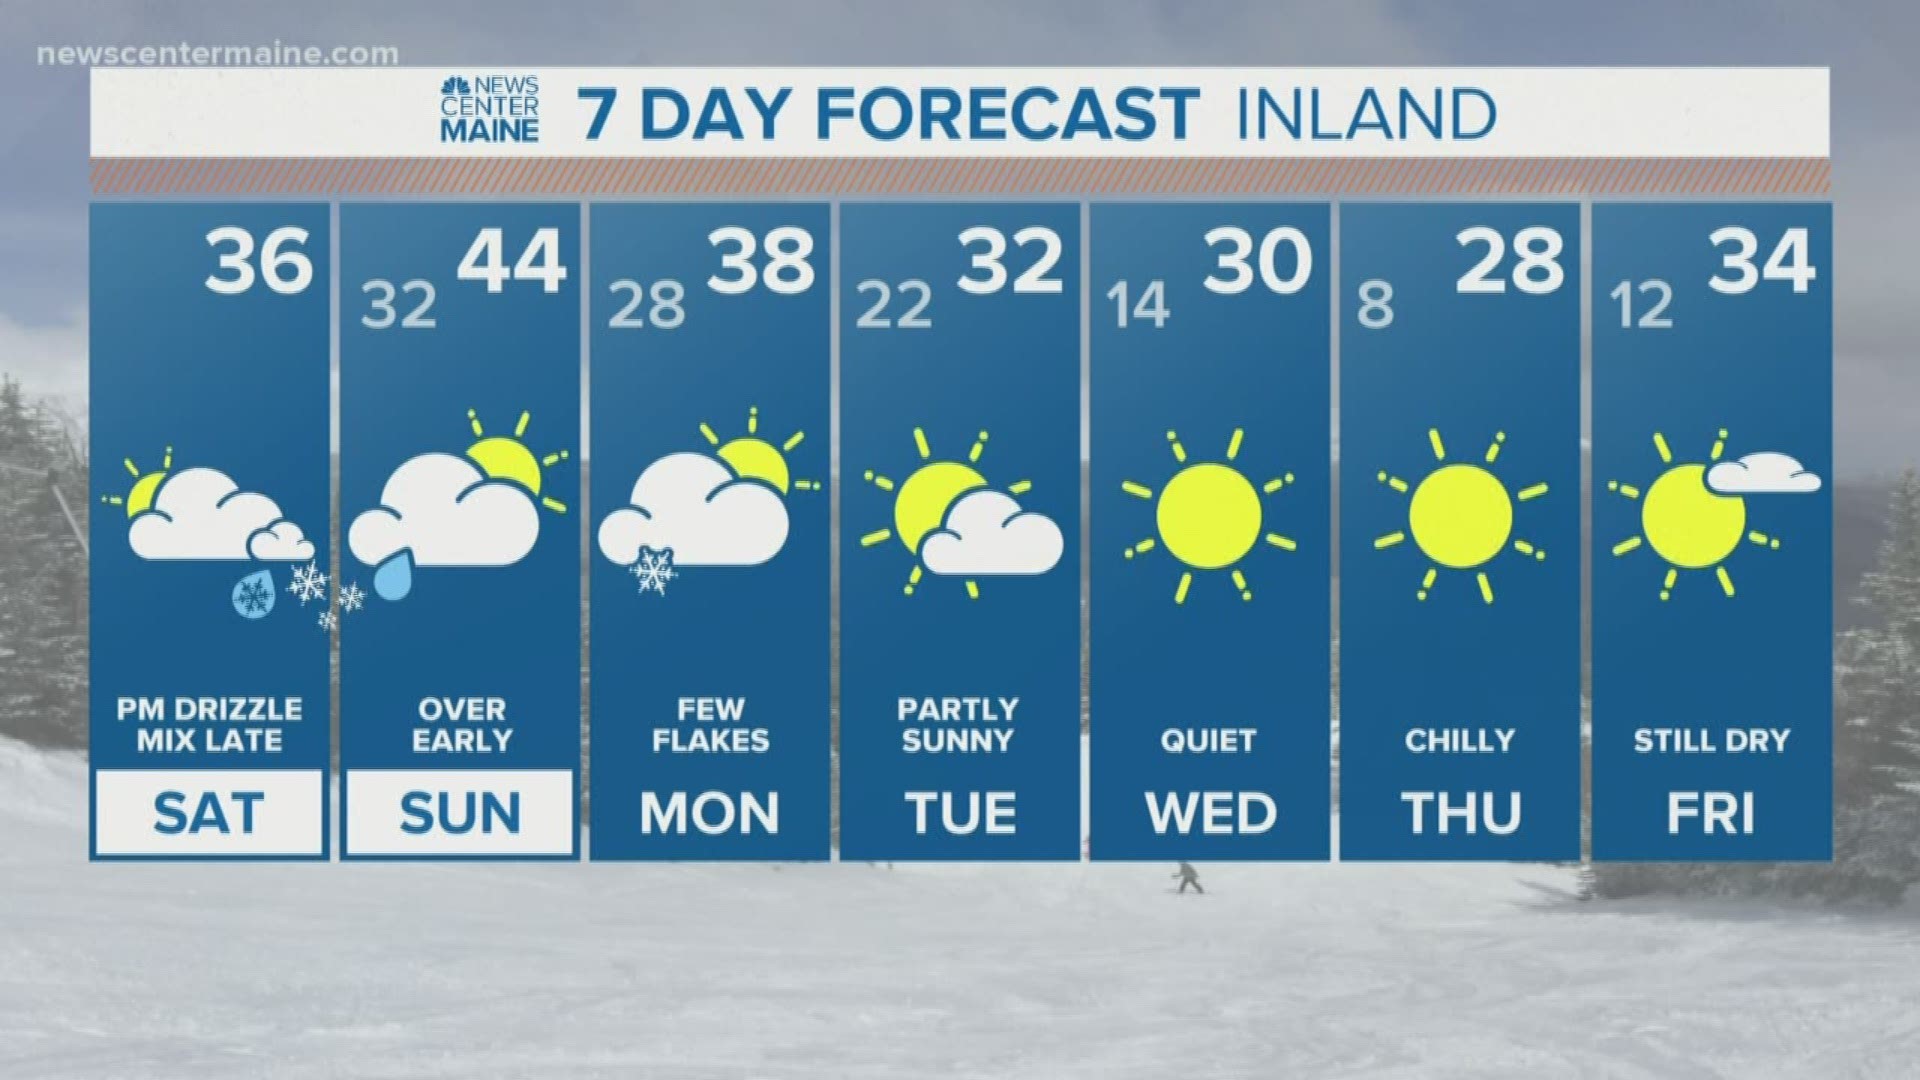 NEWS CENTER Maine Weather Video Forecast. Updated on 1/25/20 at 7:00 am.